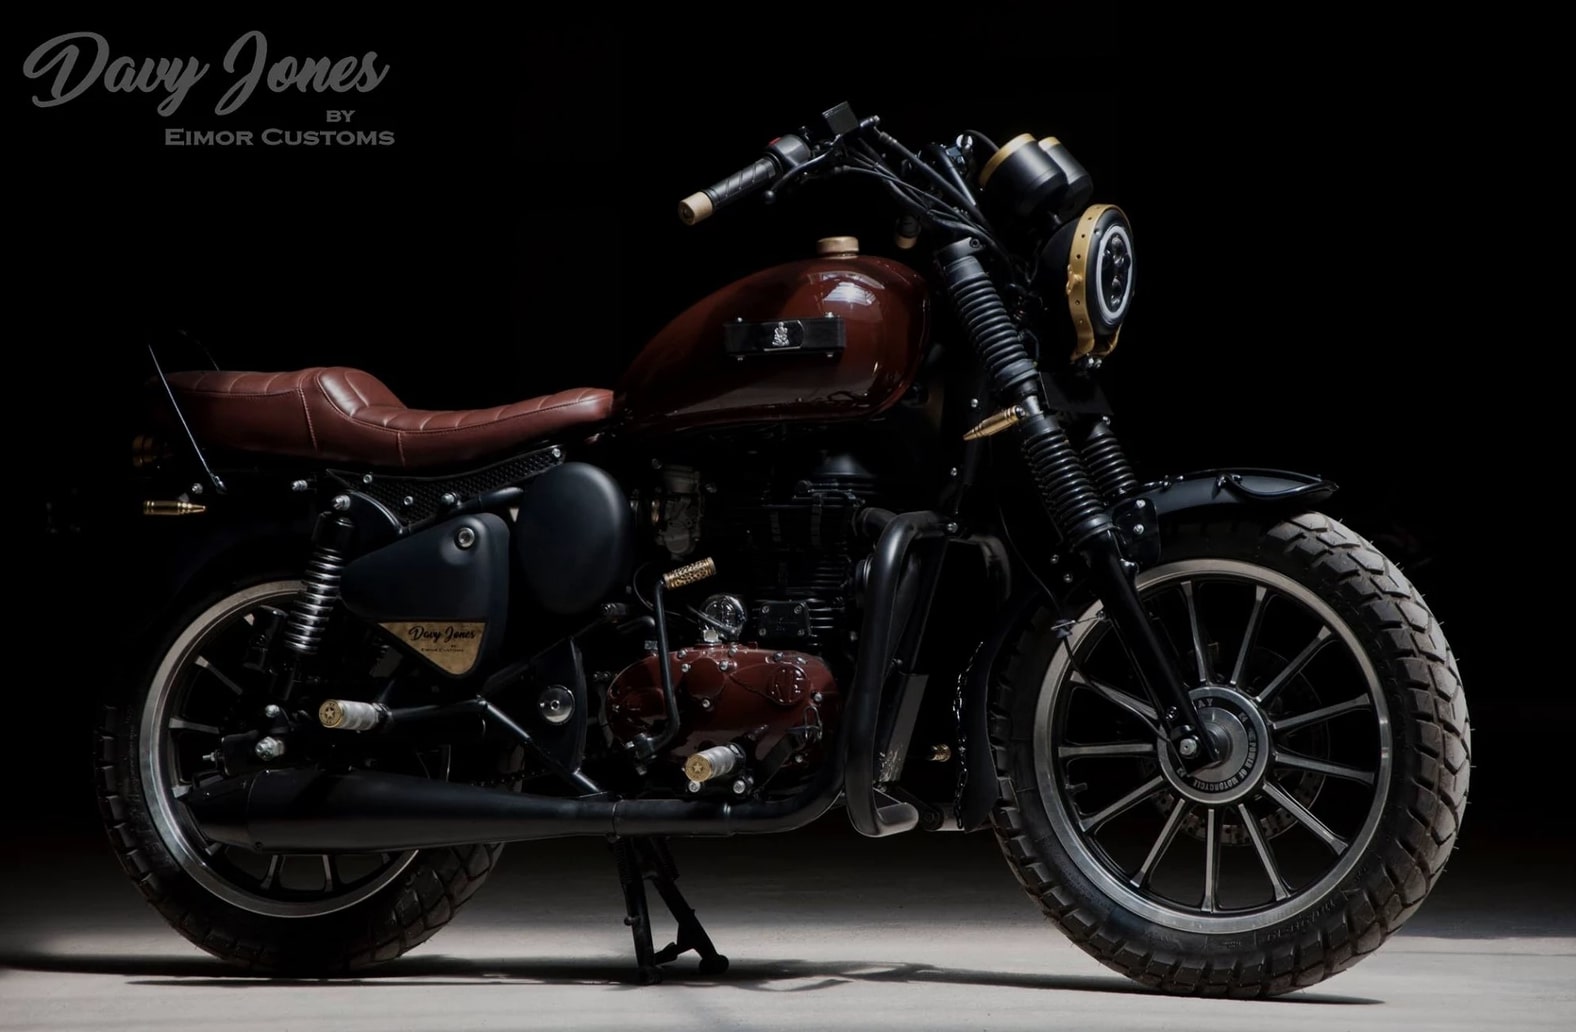 EIMOR Royal Enfield TB 350 Davy Jones Edition Details and Photos - top